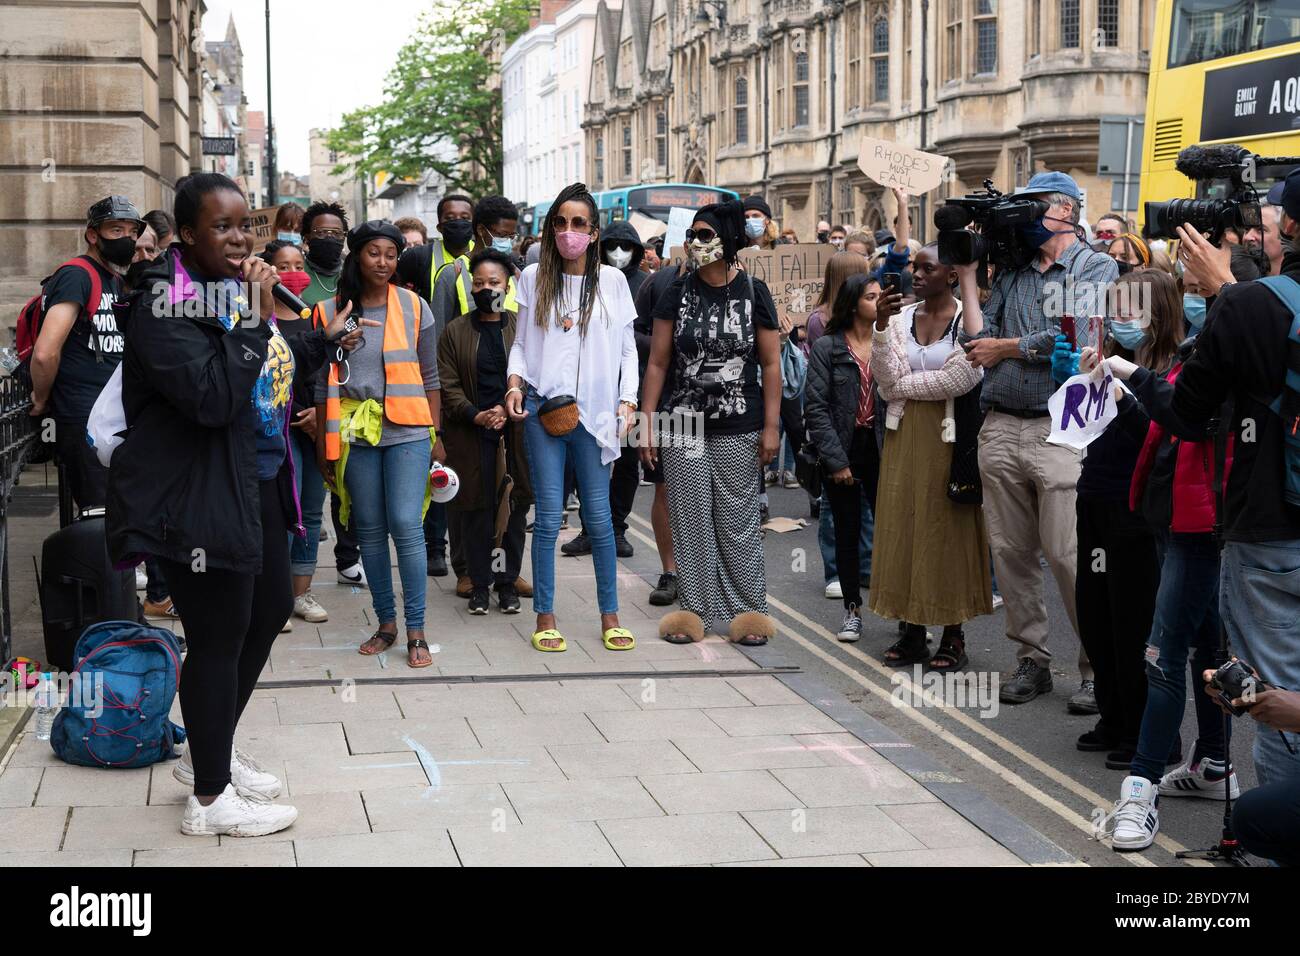 Oxford. 9th June, 2020. Demonstrators take part in a protest demanding Oxford University to remove the statue of Cecil Rhodes outside Oriel College in Oxford, Britain on June 9, 2020. According to local media, hundreds of Black Lives Matter protesters gathered in Oxford to call for a statue of Cecil Rhodes to be pulled down, following the toppling of a statue of 17th-century slave trader Edward Colston during a protest in Bristol last Sunday. Credit: Ray Tang/Xinhua/Alamy Live News Stock Photo